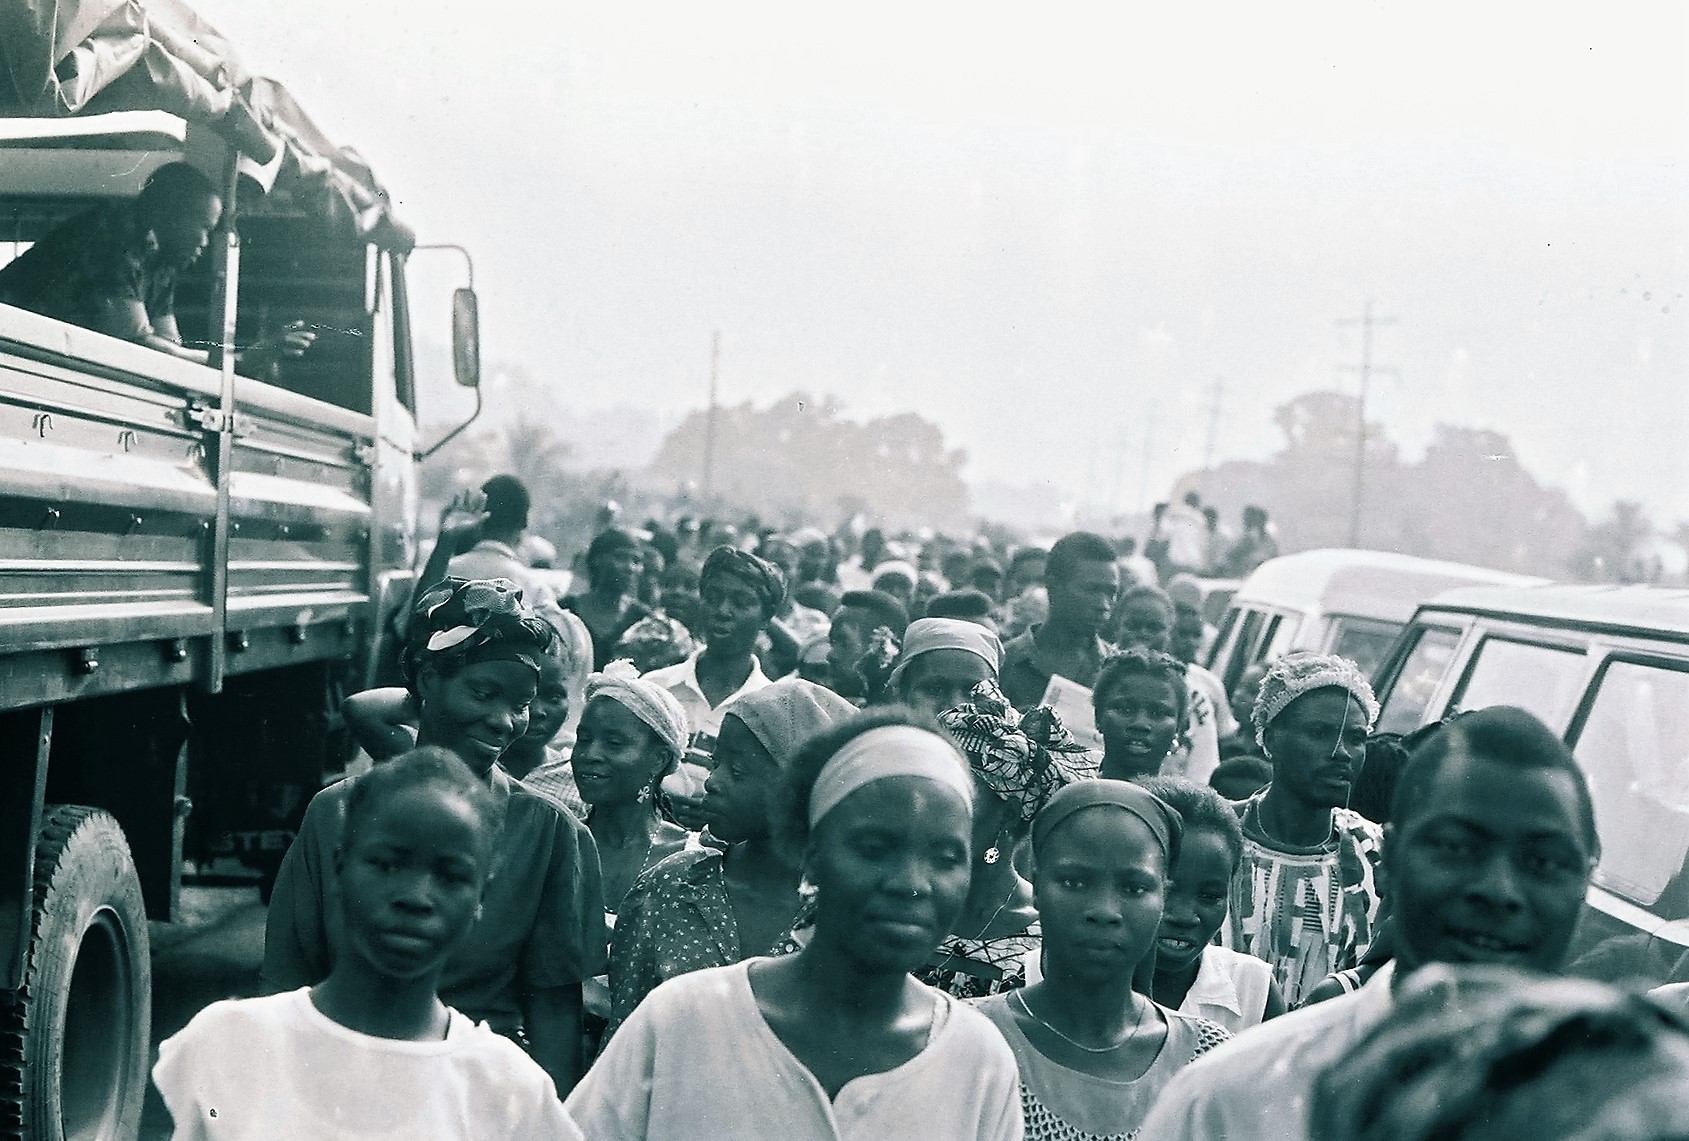 Thousands of Liberians trapped in then "Greater Liberia" flocked into the Mount Barclay buffer zone on the out-sketch of Monrovia in 1991. The await the official re-opening of the main Monrovia Kakata-Gbarnga Highways that connects the rest of the country to the capital. While some came eager to enter Monrovia to search for lost relatives separated the NPFL-AFL war into its second year. Many too advantage of this single act by the faction to seek respite from harassment and brutality by the NPFL. Others escape the faction's territories known as "Taylor Land." Former NPFL spokesperson-later Defense Minister Jucontee Thomas Woewiyu led a high-powered NPFL delegation to this elaborate event, accompanied by other NPFL officials including lawyer Francis Garlawolo, NPFL chief of staff Gen. Isaac Musa and the front's information minister, Joseph Wolobah Mulbah(not in this photograph). Photo: James K. Fasuekoi/The AfricaPaper 